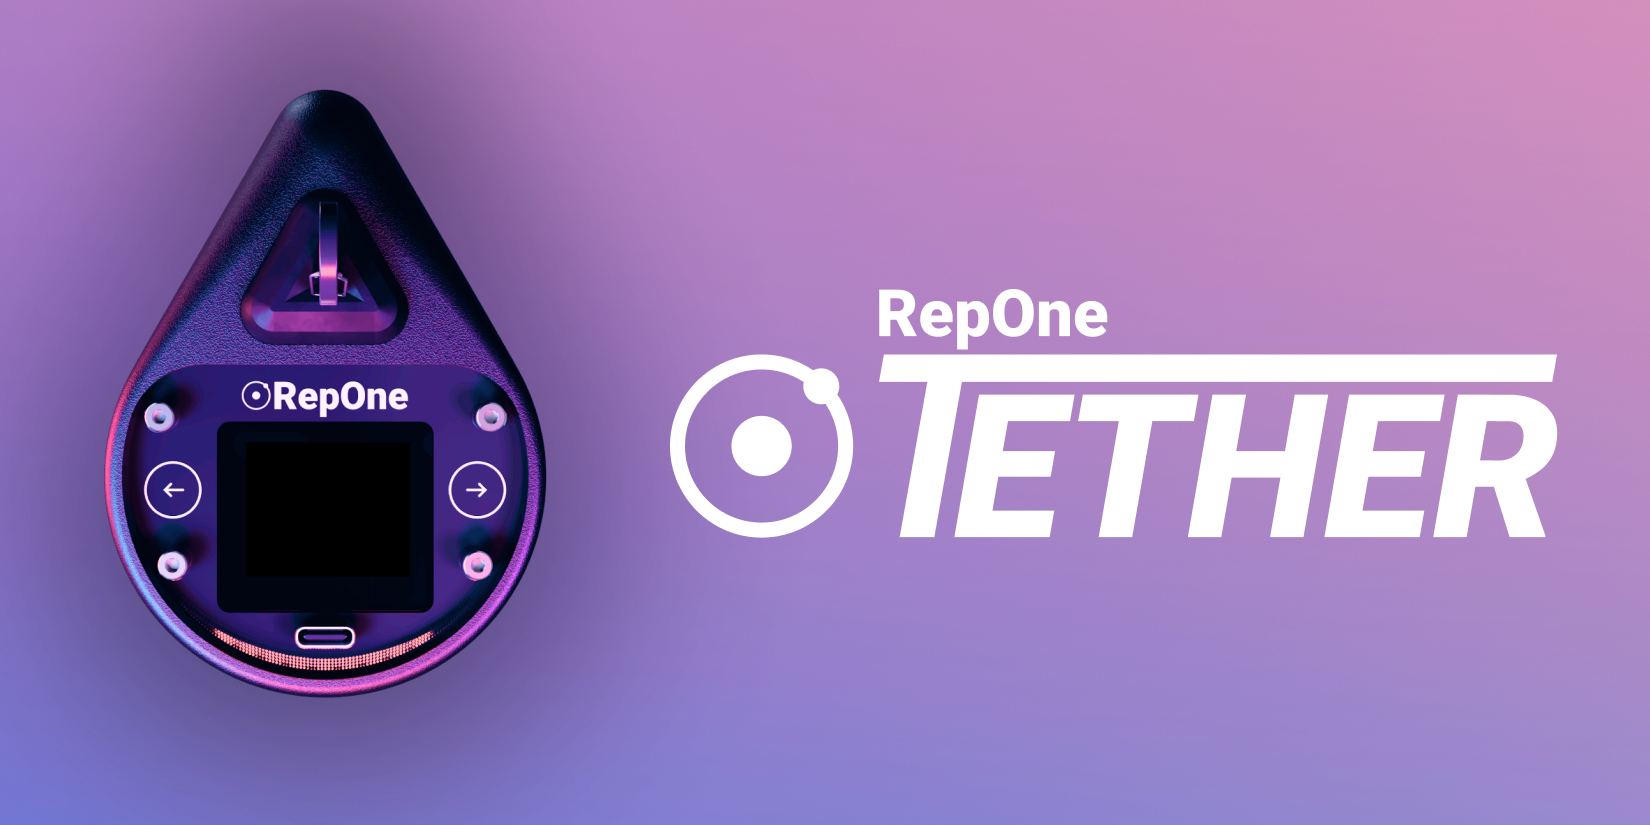 RepOne Tether - The Internal Improvements to Our VBT Sensors